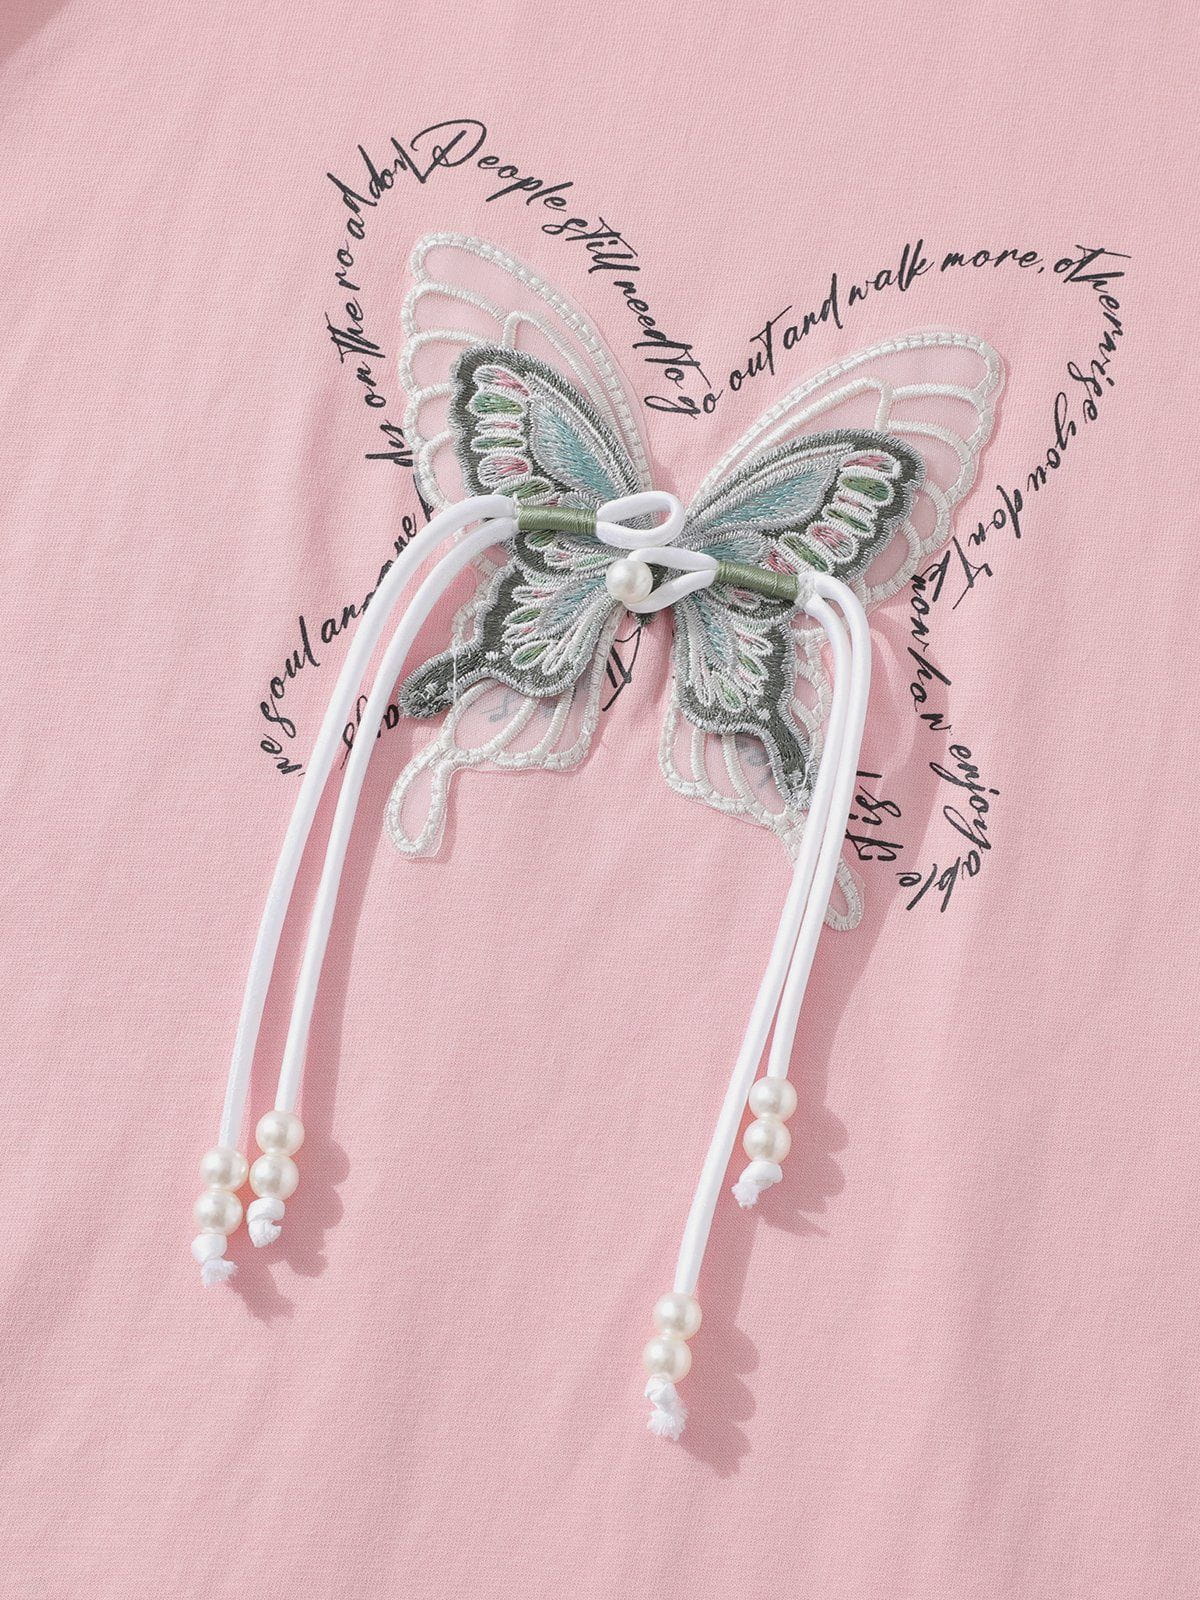 Aelfric Eden Strap Embroidery Butterfly Tee